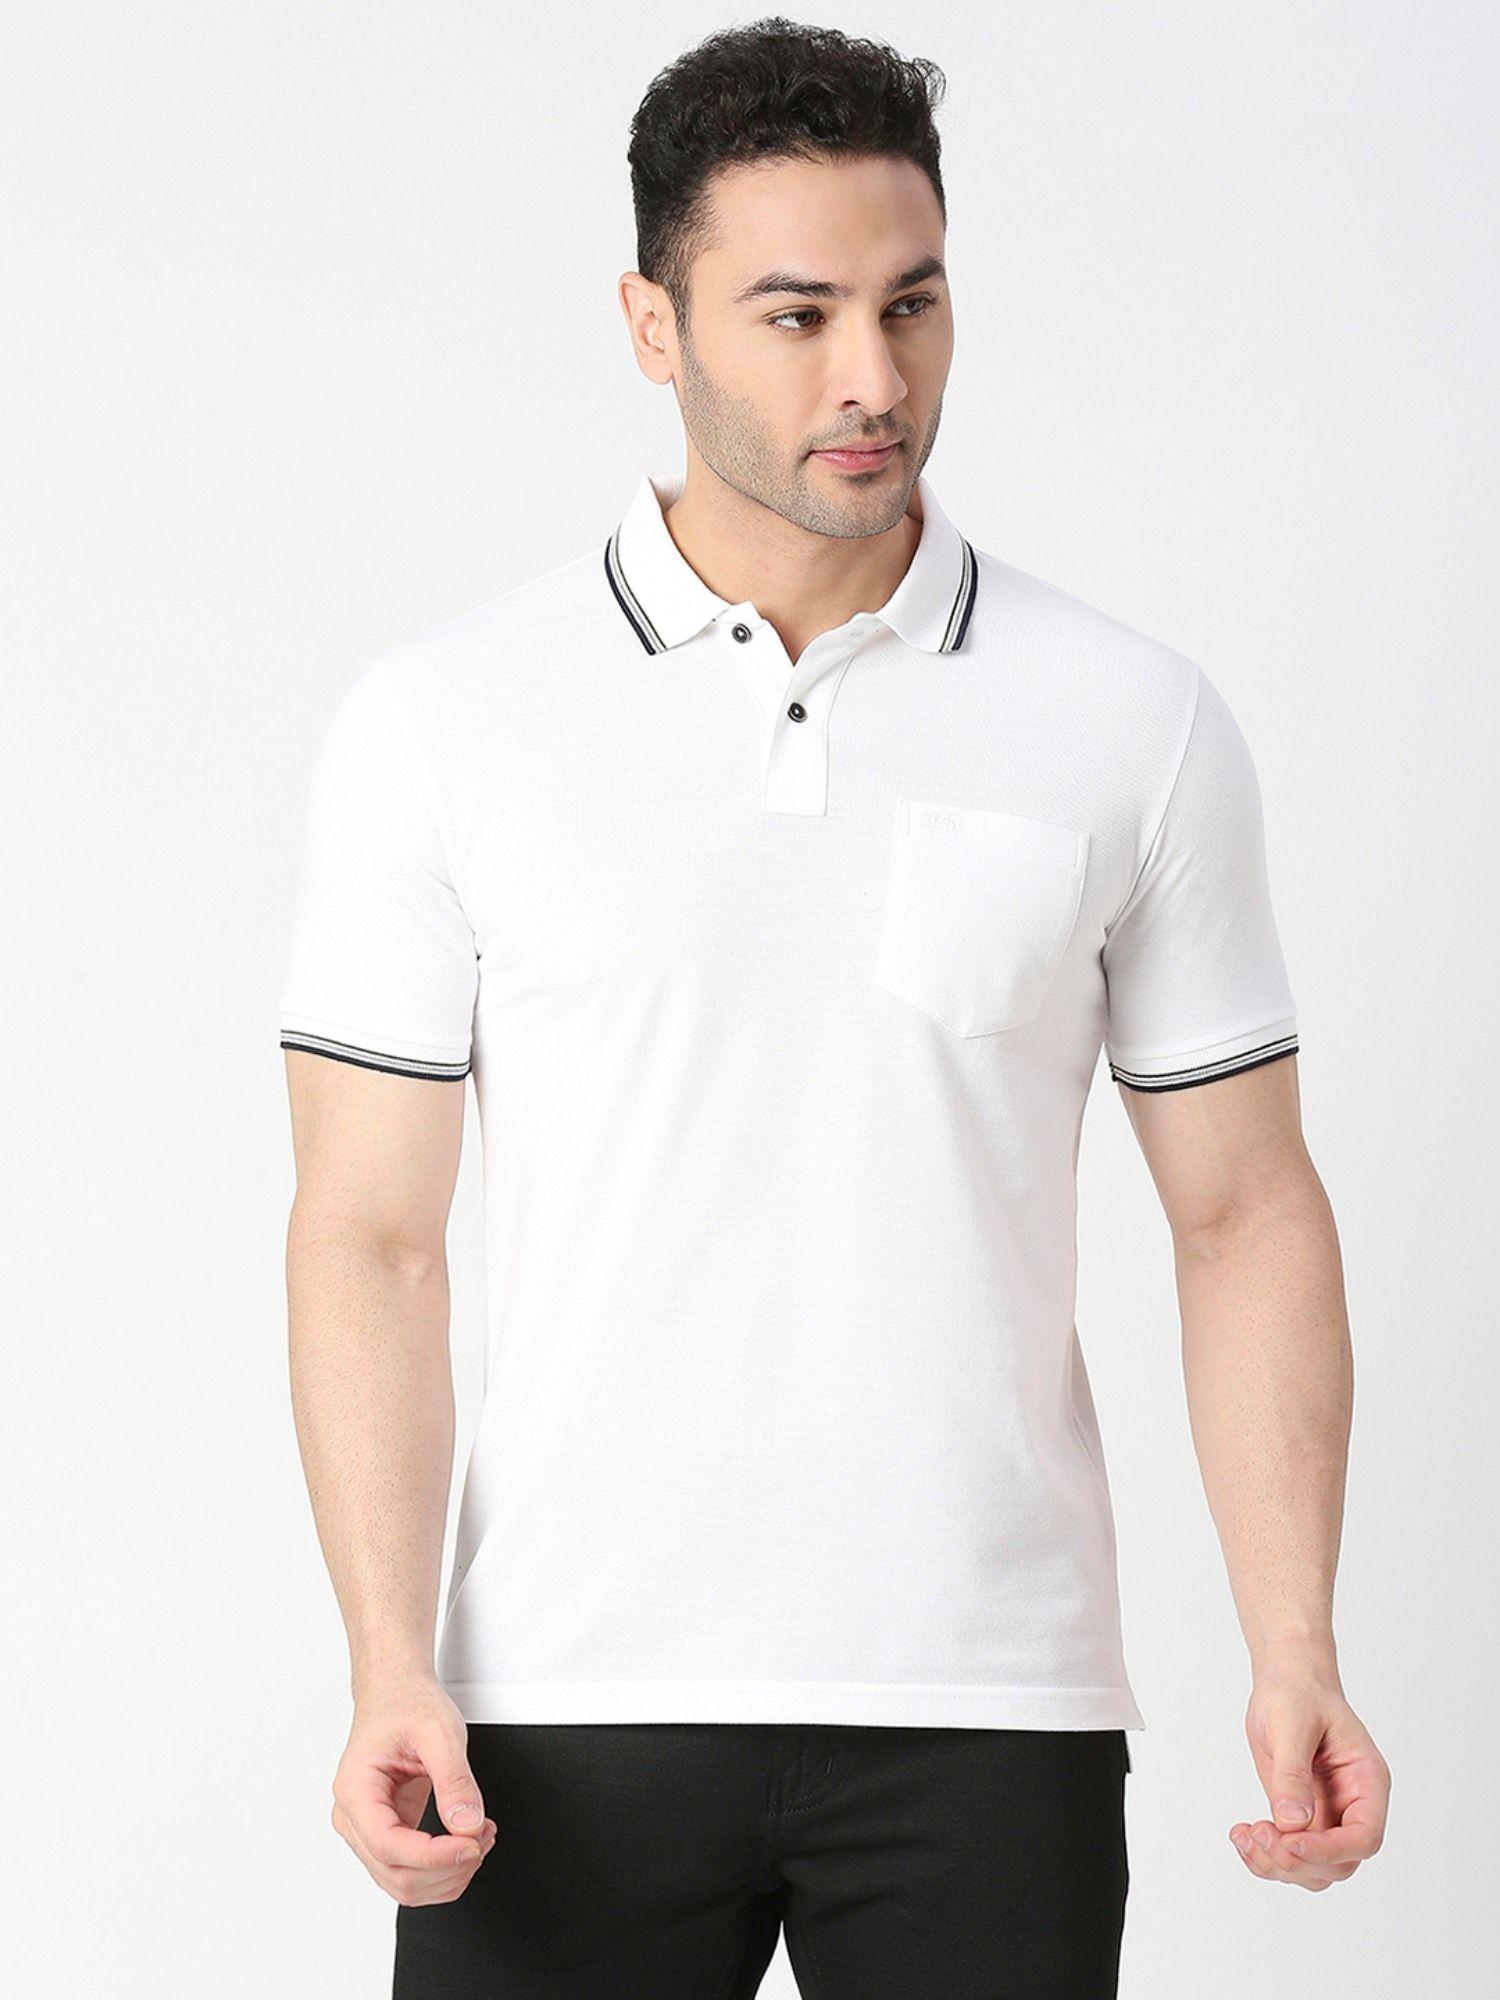 half-sleeves-white-pique-polo-t-shirt-with-pocket